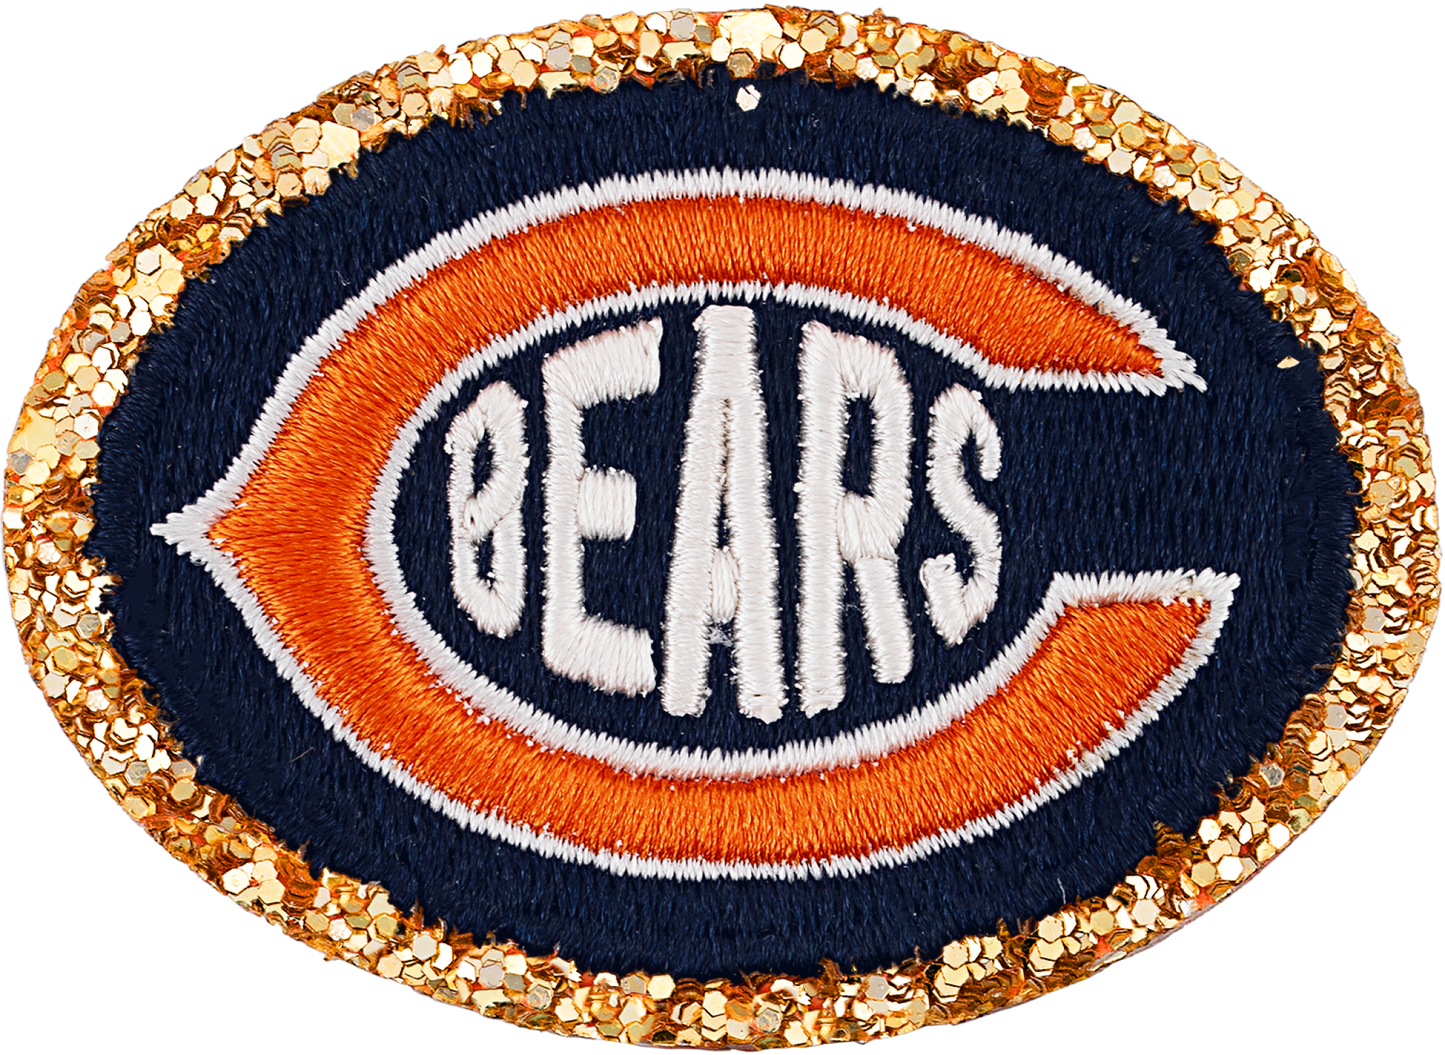 Chicago Bears Patch